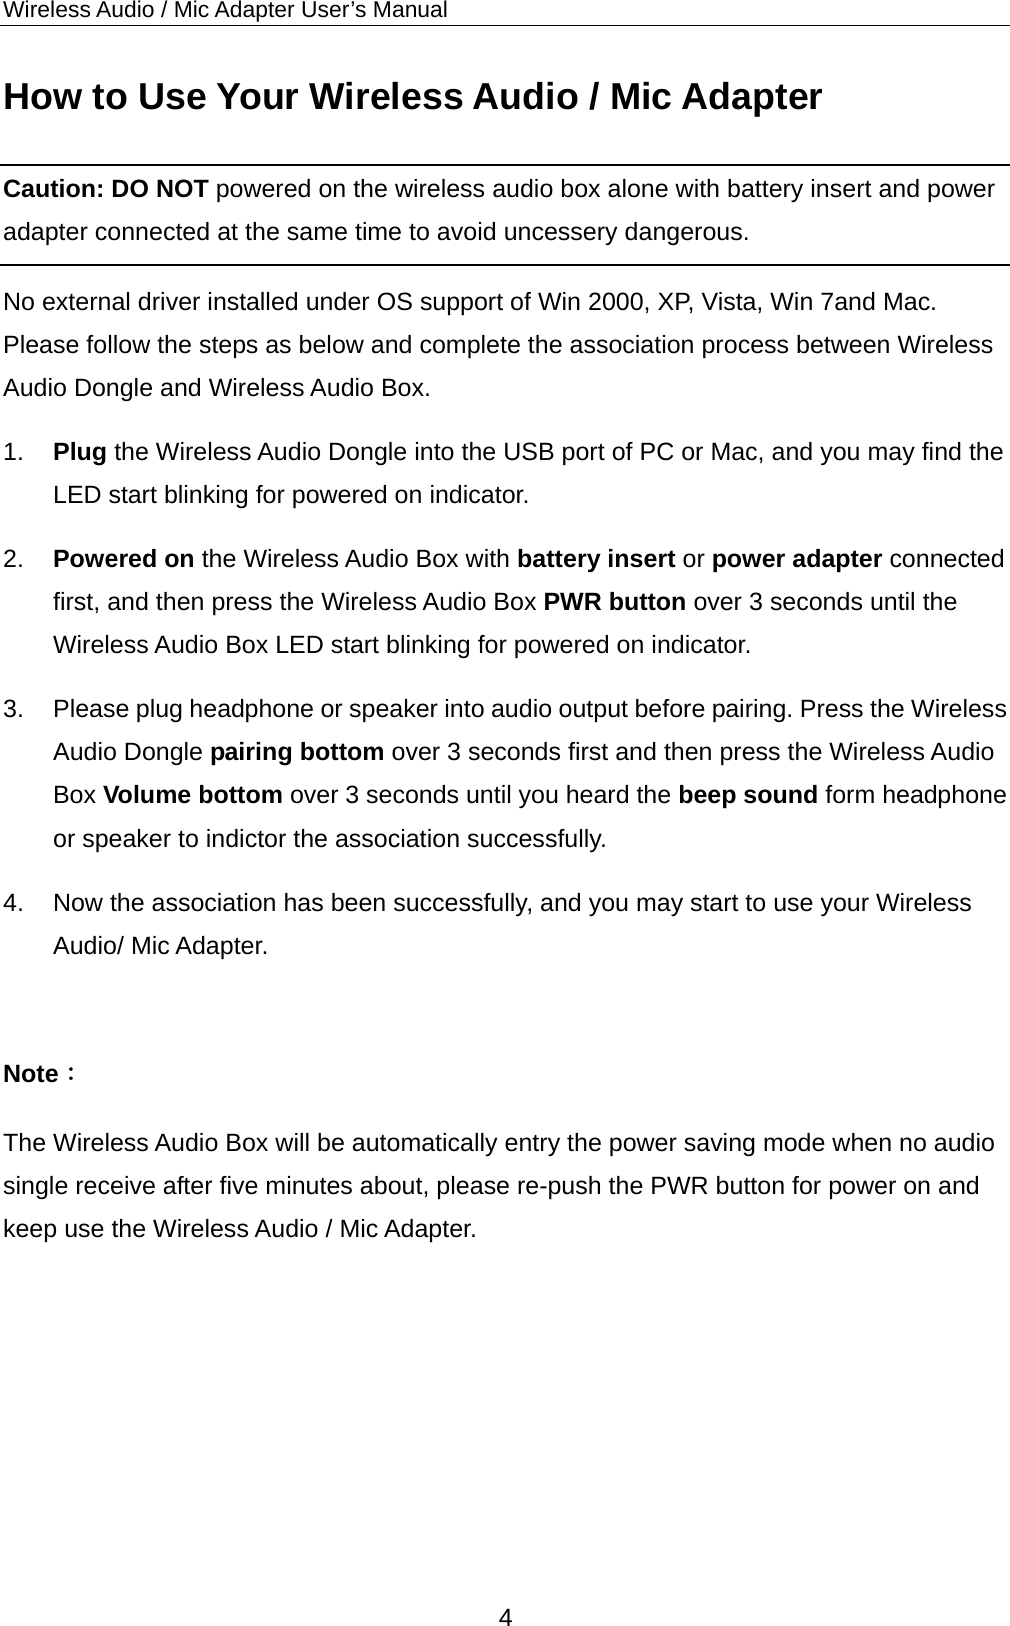 Wireless Audio / Mic Adapter User’s Manual How to Use Your Wireless Audio / Mic Adapter Caution: DO NOT powered on the wireless audio box alone with battery insert and power adapter connected at the same time to avoid uncessery dangerous.   No external driver installed under OS support of Win 2000, XP, Vista, Win 7and Mac. Please follow the steps as below and complete the association process between Wireless Audio Dongle and Wireless Audio Box. 1.  Plug the Wireless Audio Dongle into the USB port of PC or Mac, and you may find the LED start blinking for powered on indicator. 2.  Powered on the Wireless Audio Box with battery insert or power adapter connected first, and then press the Wireless Audio Box PWR button over 3 seconds until the Wireless Audio Box LED start blinking for powered on indicator. 3.  Please plug headphone or speaker into audio output before pairing. Press the Wireless Audio Dongle pairing bottom over 3 seconds first and then press the Wireless Audio Box Volume bottom over 3 seconds until you heard the beep sound form headphone or speaker to indictor the association successfully.   4.  Now the association has been successfully, and you may start to use your Wireless Audio/ Mic Adapter.  Note： The Wireless Audio Box will be automatically entry the power saving mode when no audio single receive after five minutes about, please re-push the PWR button for power on and keep use the Wireless Audio / Mic Adapter.     4 